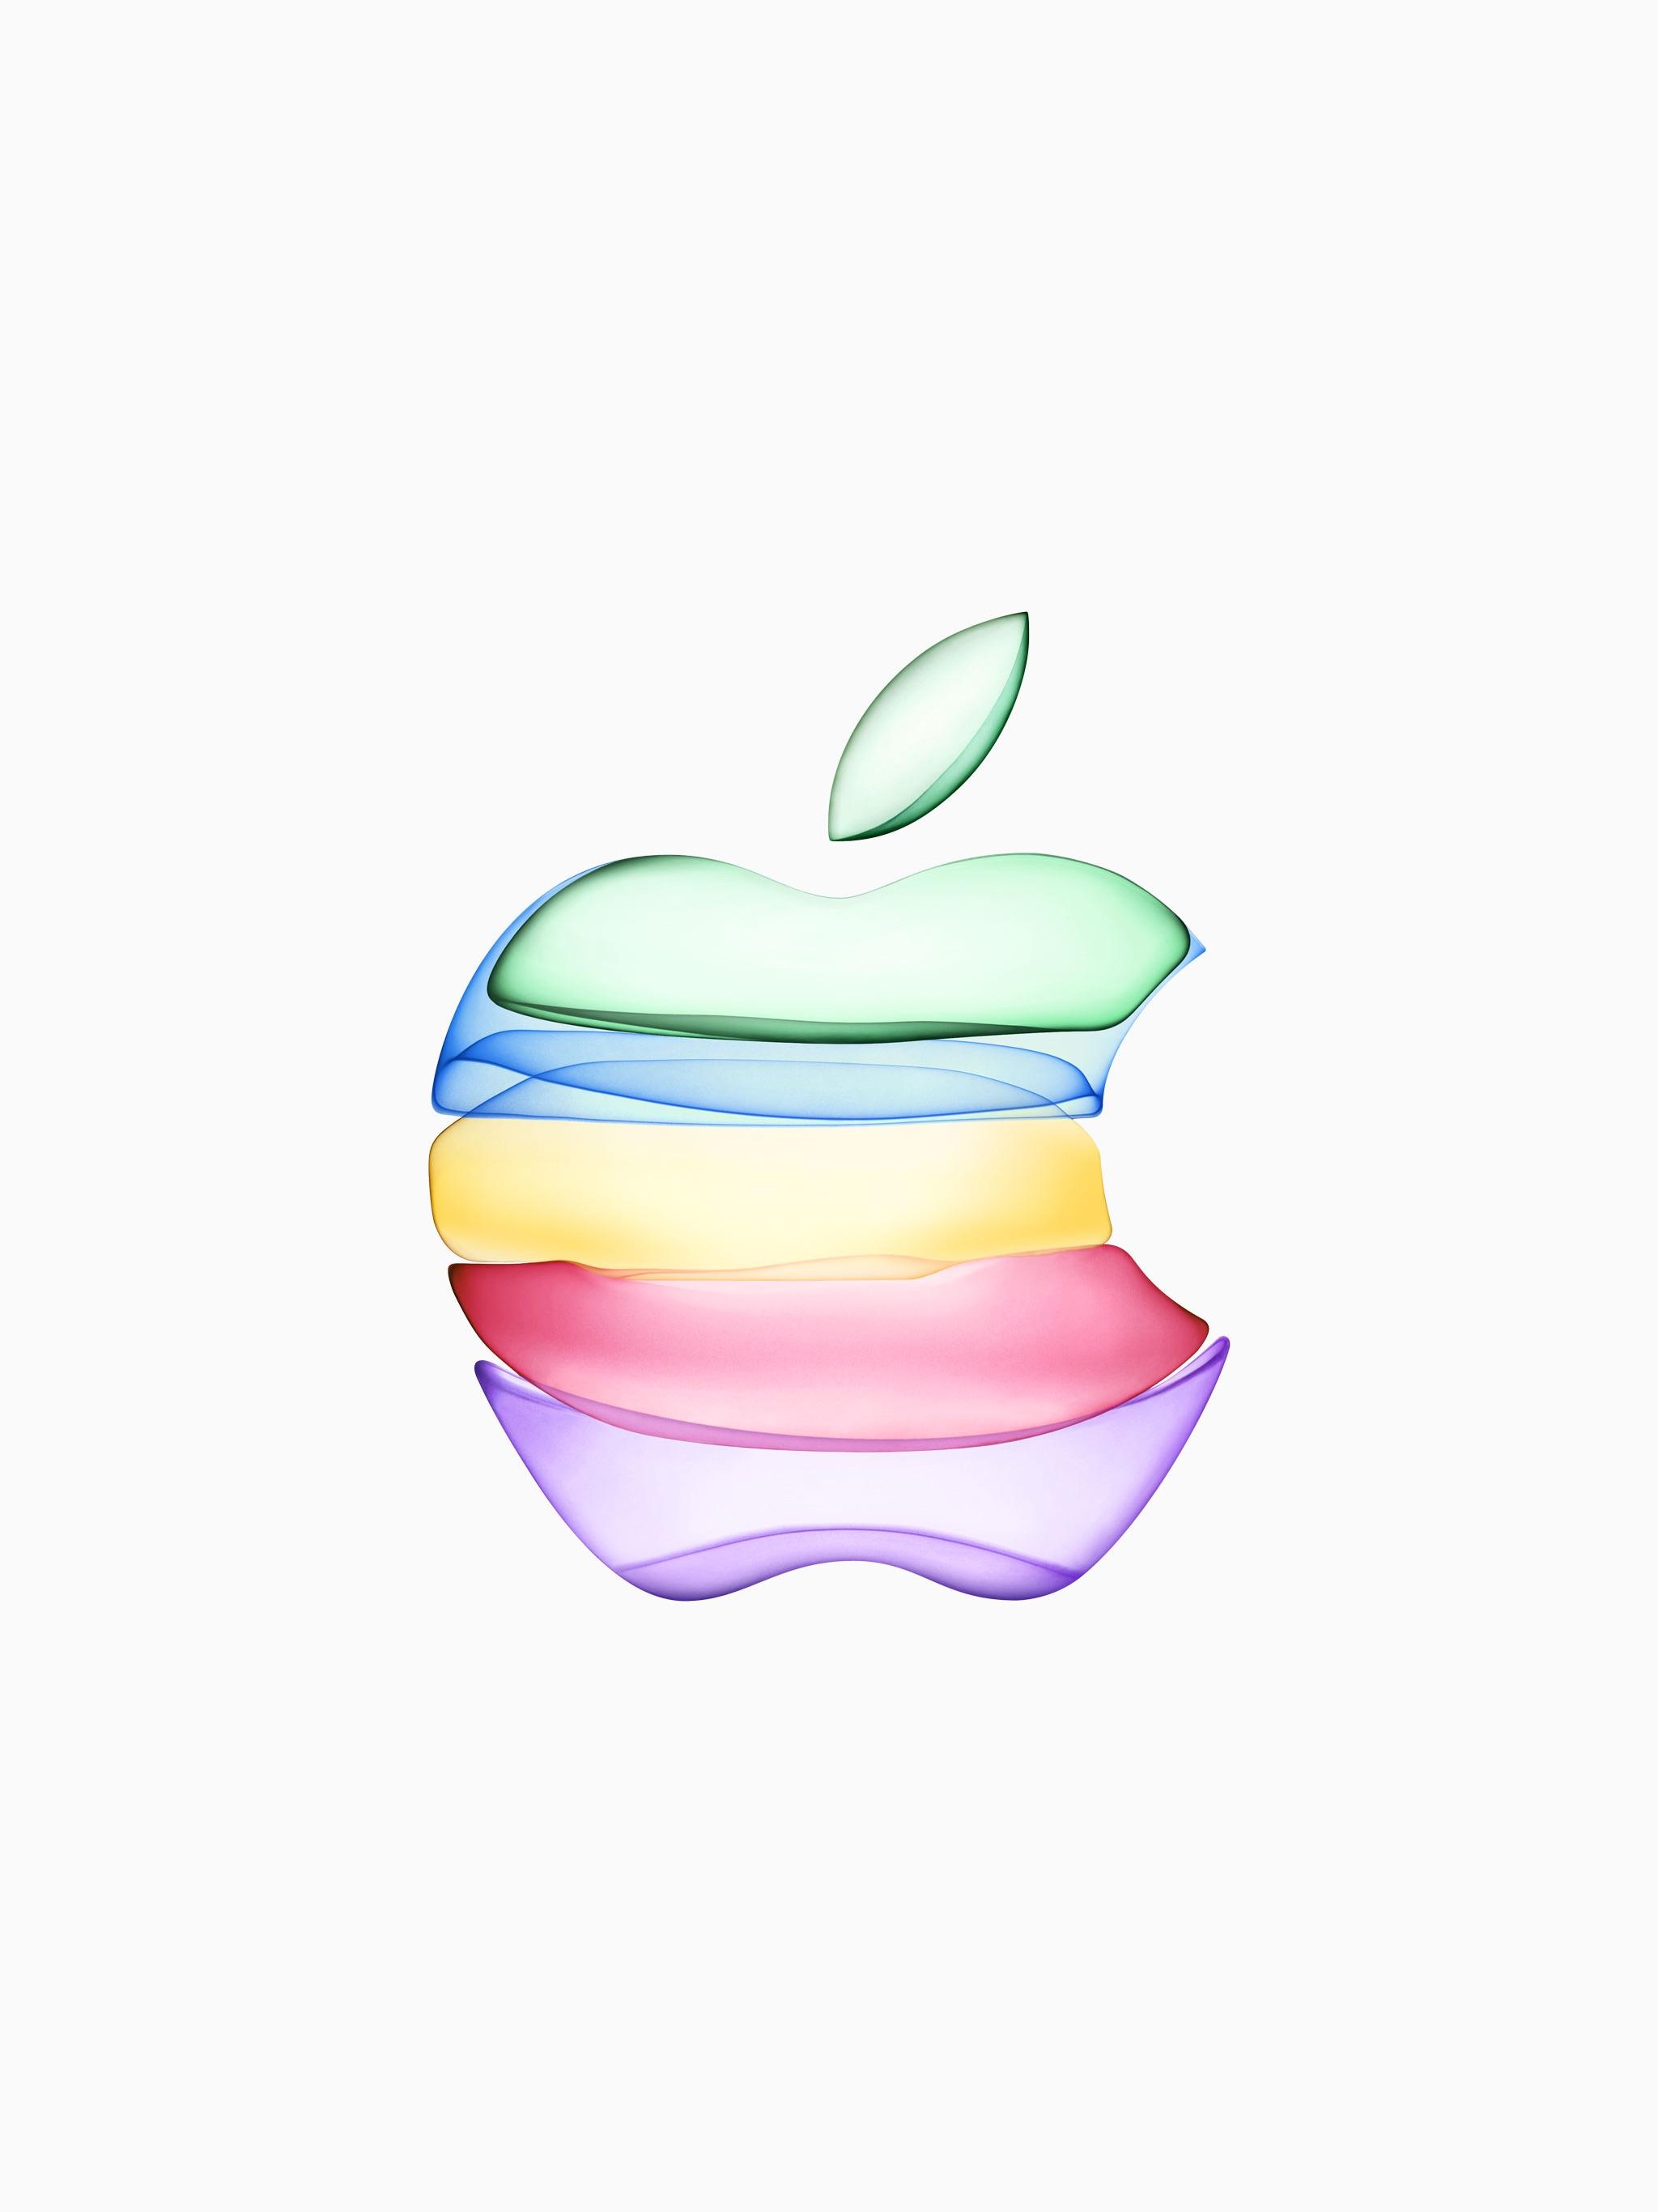 Download iPhone 11 Event Apple Logo Wallpaper For iPhone, iPad And Mac